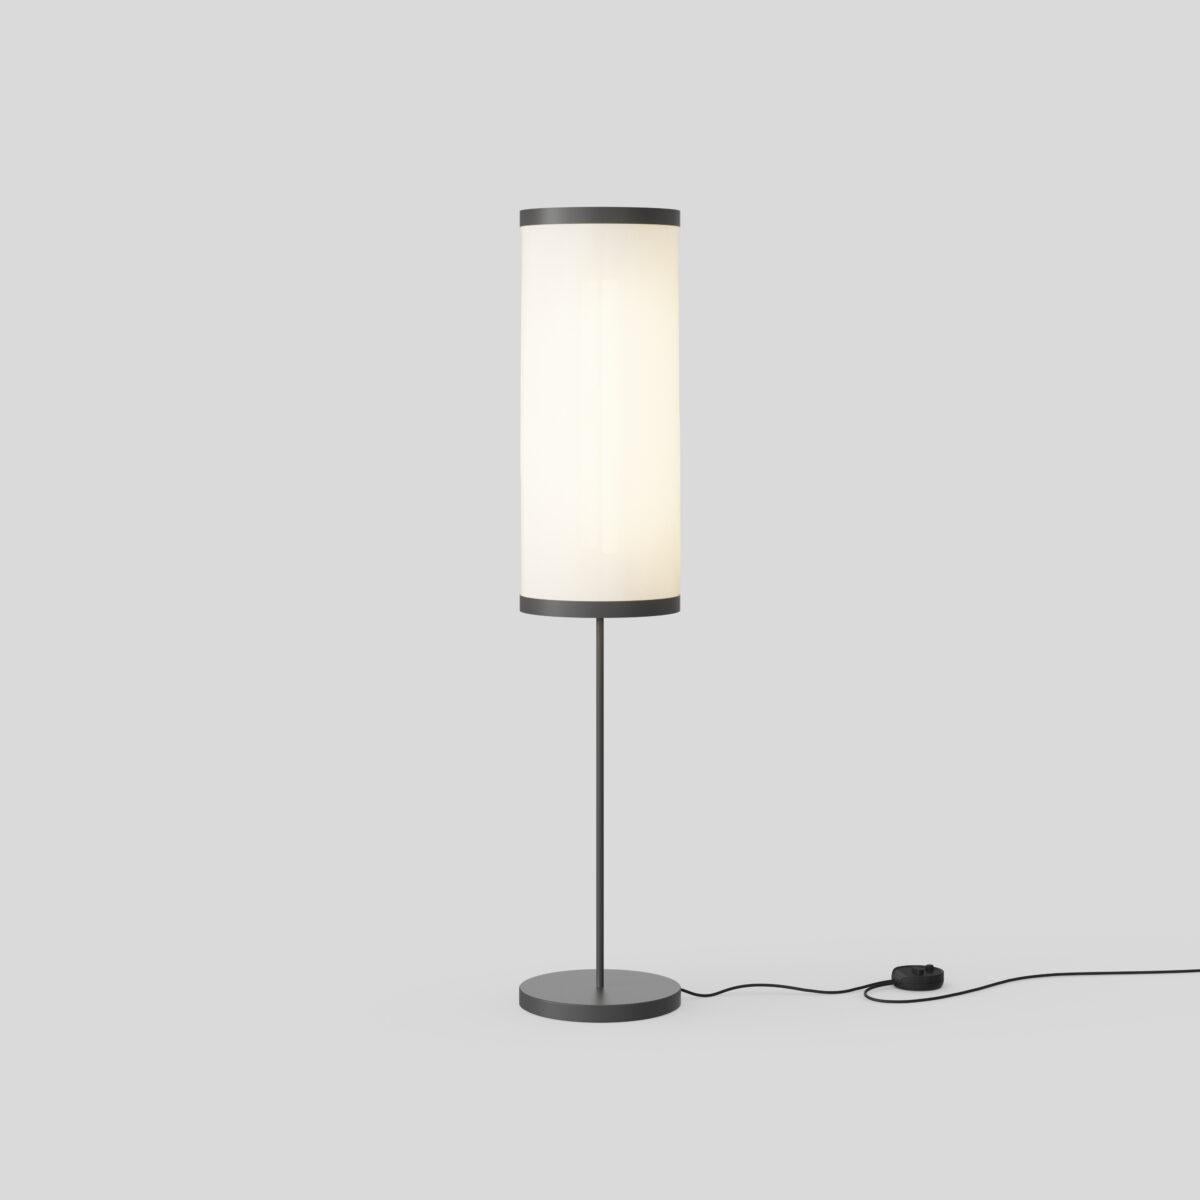 Isol Floor Lamp
Design by David Thulstrup

Specifications: Isolators
Typology: Floor
Materials: Aluminium Structure, Acoustic Absorbent Fabric Diffuser with Snowsound® Technology
Dimensions: Ø 300 x H 1480 mm 
Diffuser diameter: Ø 300 mm x 760